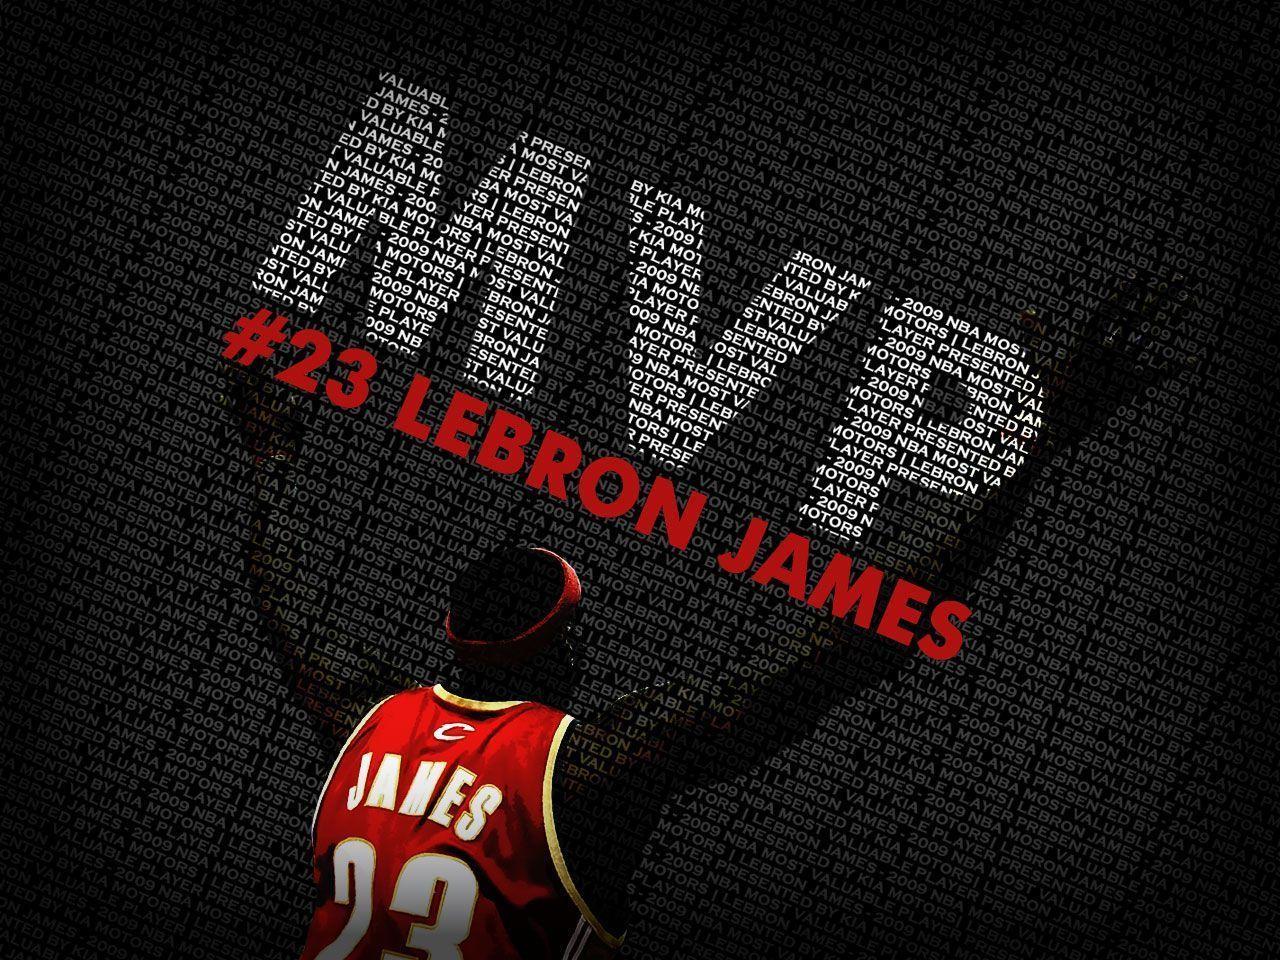 LeBron James MVP and Cavaliers Playoff -One Goal- Wallpaper